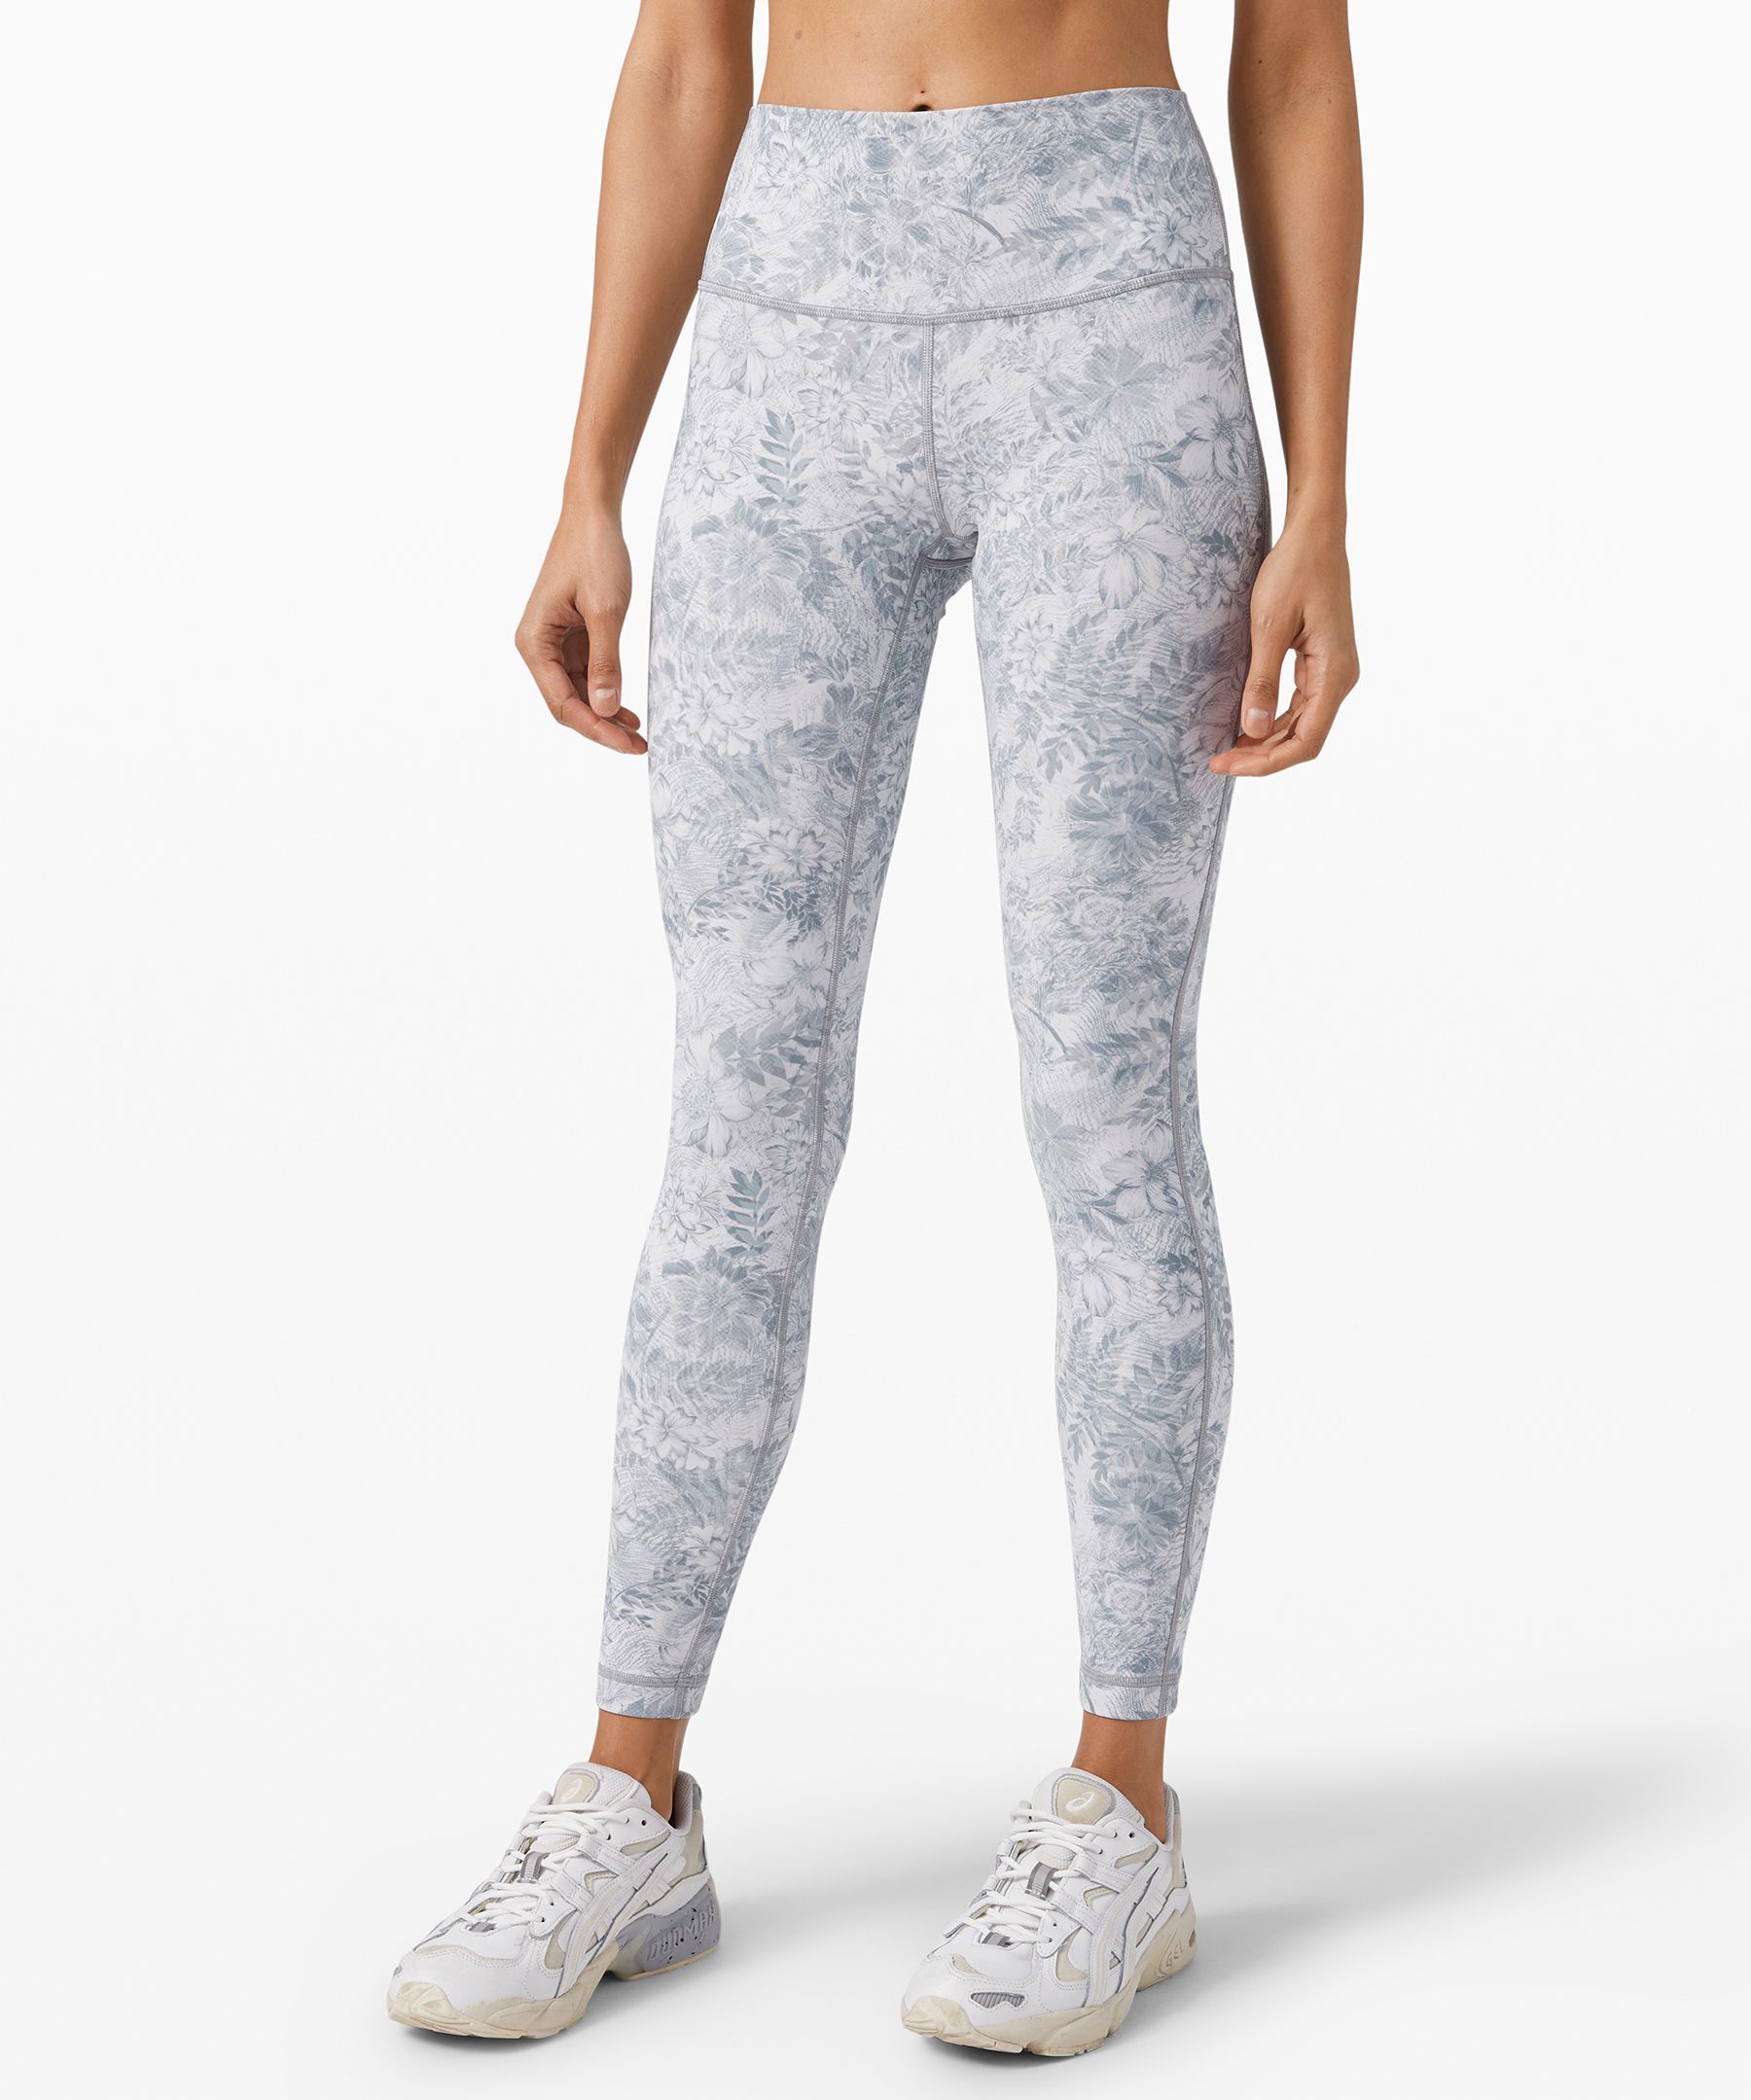 Lululemon Wunder Under High-rise Tight 28 *full-on Luxtreme In